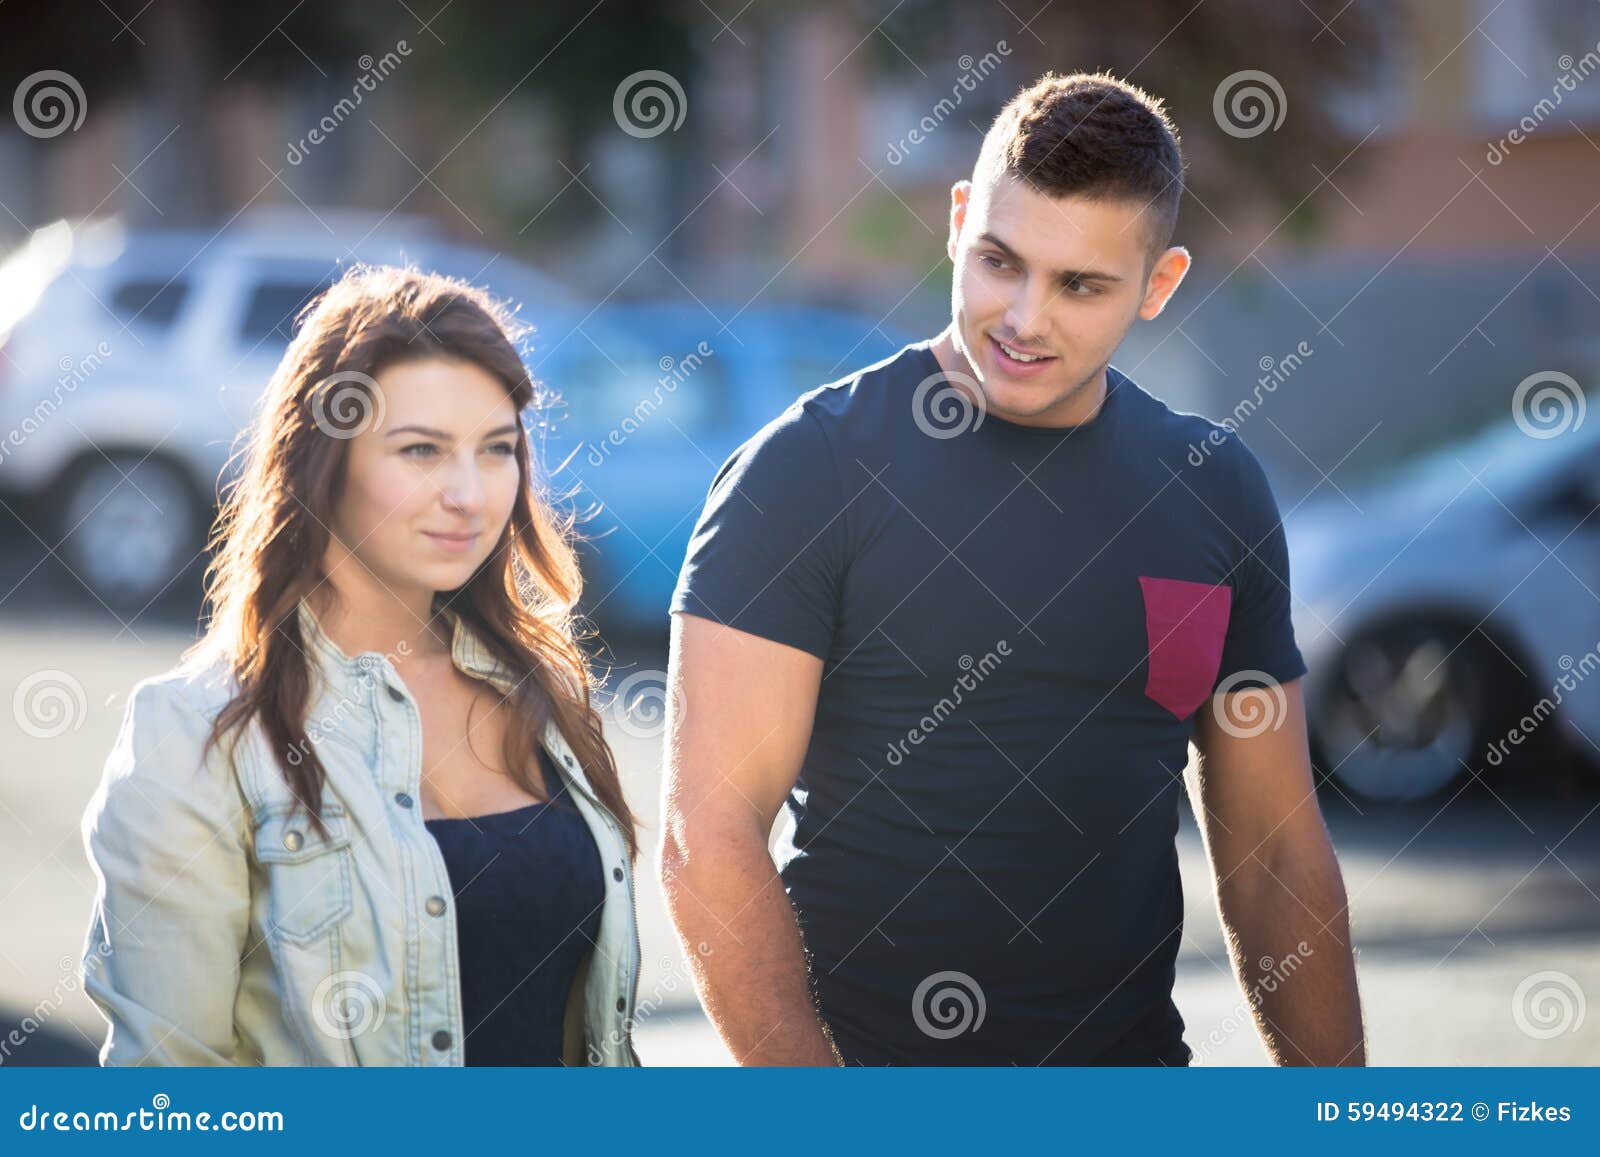 guy flirting with young woman on the street